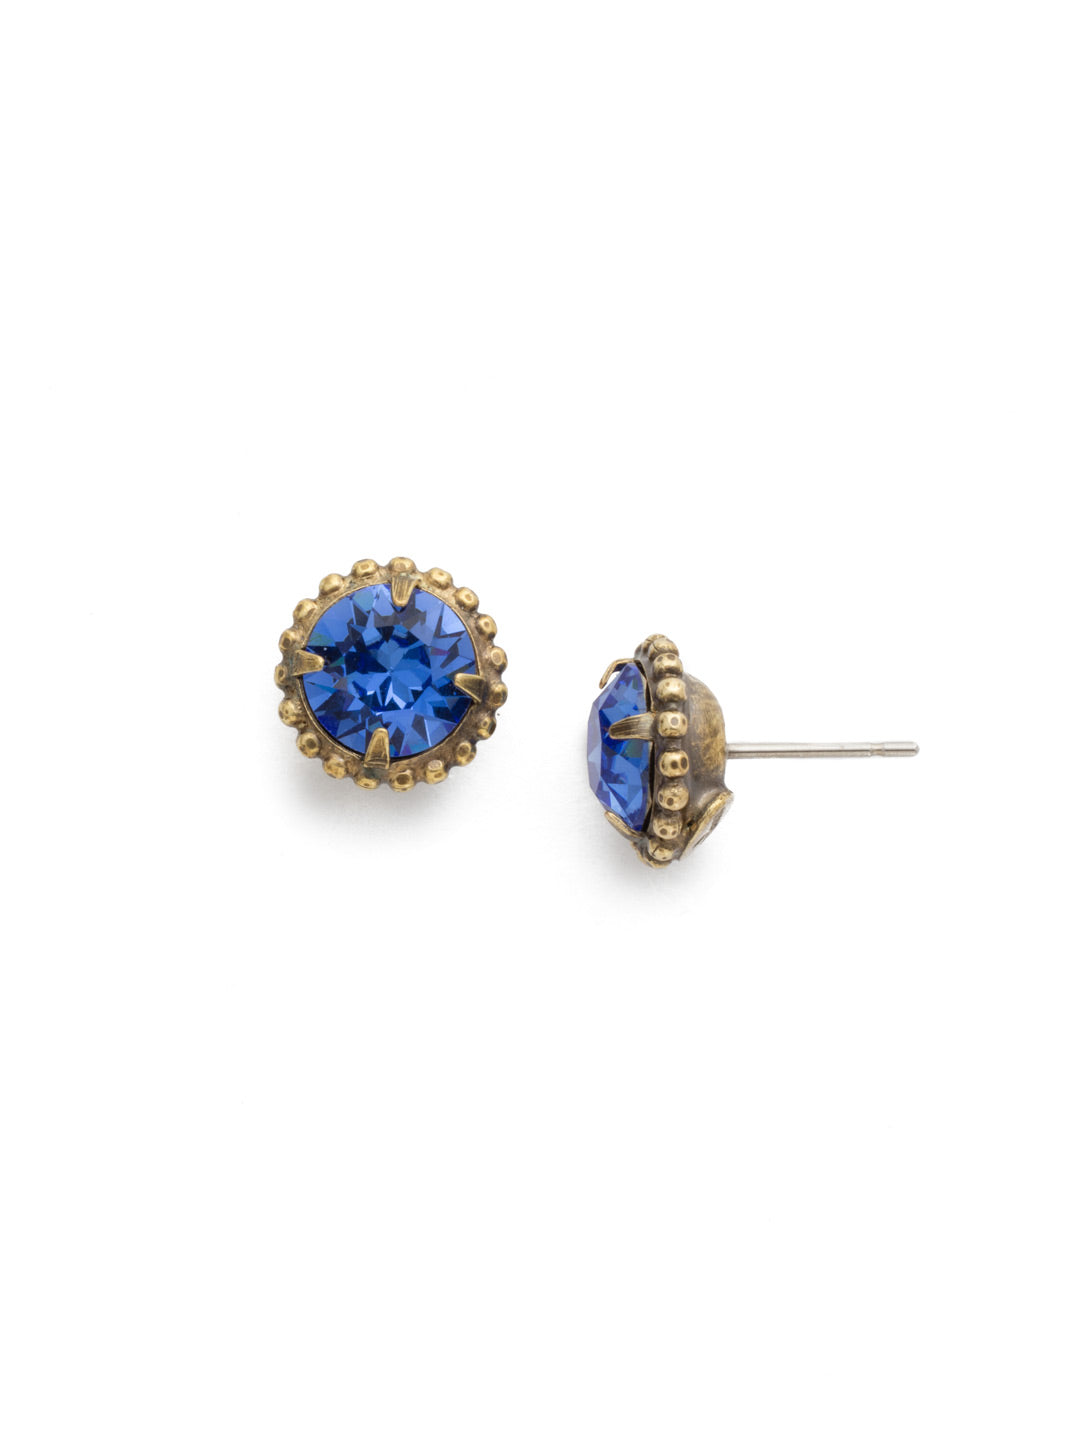 Simplicity Stud Earrings - EBY38AGSAP - <p>A timeless classic, the Simplicity Stud Earrings feature round cut crystals in a variety of colors; accented with a halo of metal beaded detail. Need help picking a stud? <a href="https://www.sorrelli.com/blogs/sisterhood/round-stud-earrings-101-a-rundown-of-sizes-styles-and-sparkle">Check out our size guide!</a> From Sorrelli's Sapphire collection in our Antique Gold-tone finish.</p>